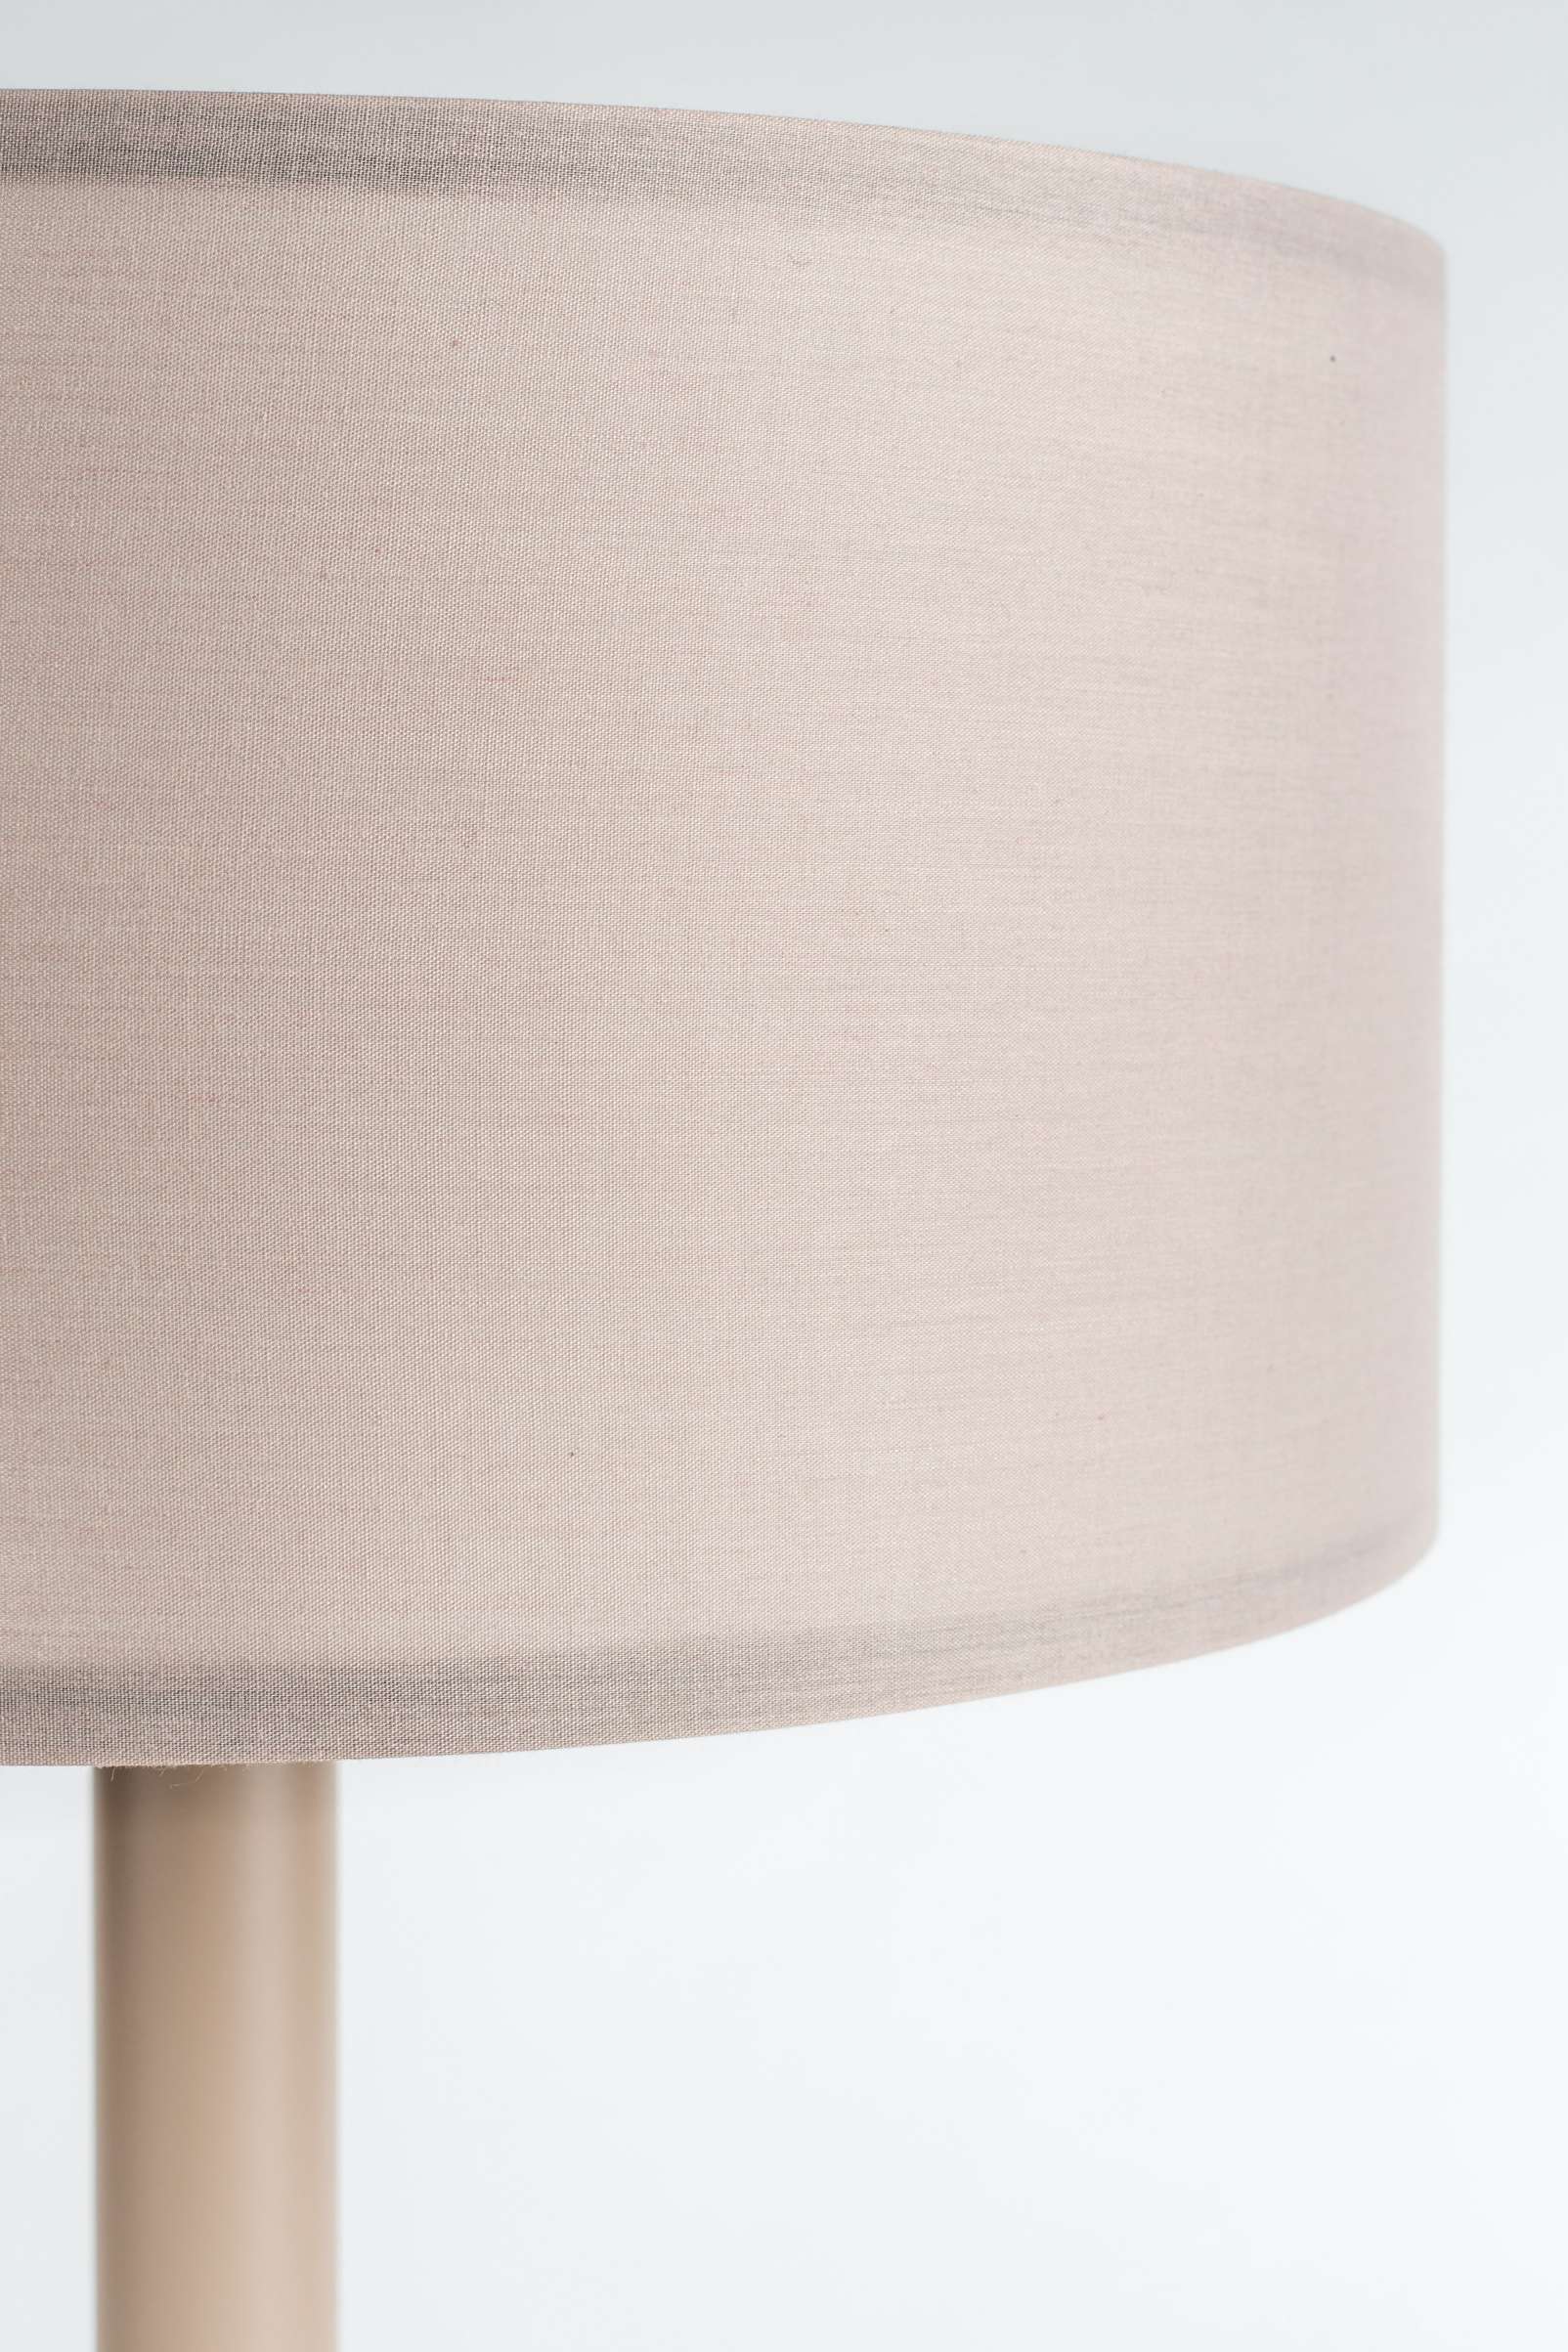 Zuiver | TABLE LAMP SHELBY TAUPE Default Title